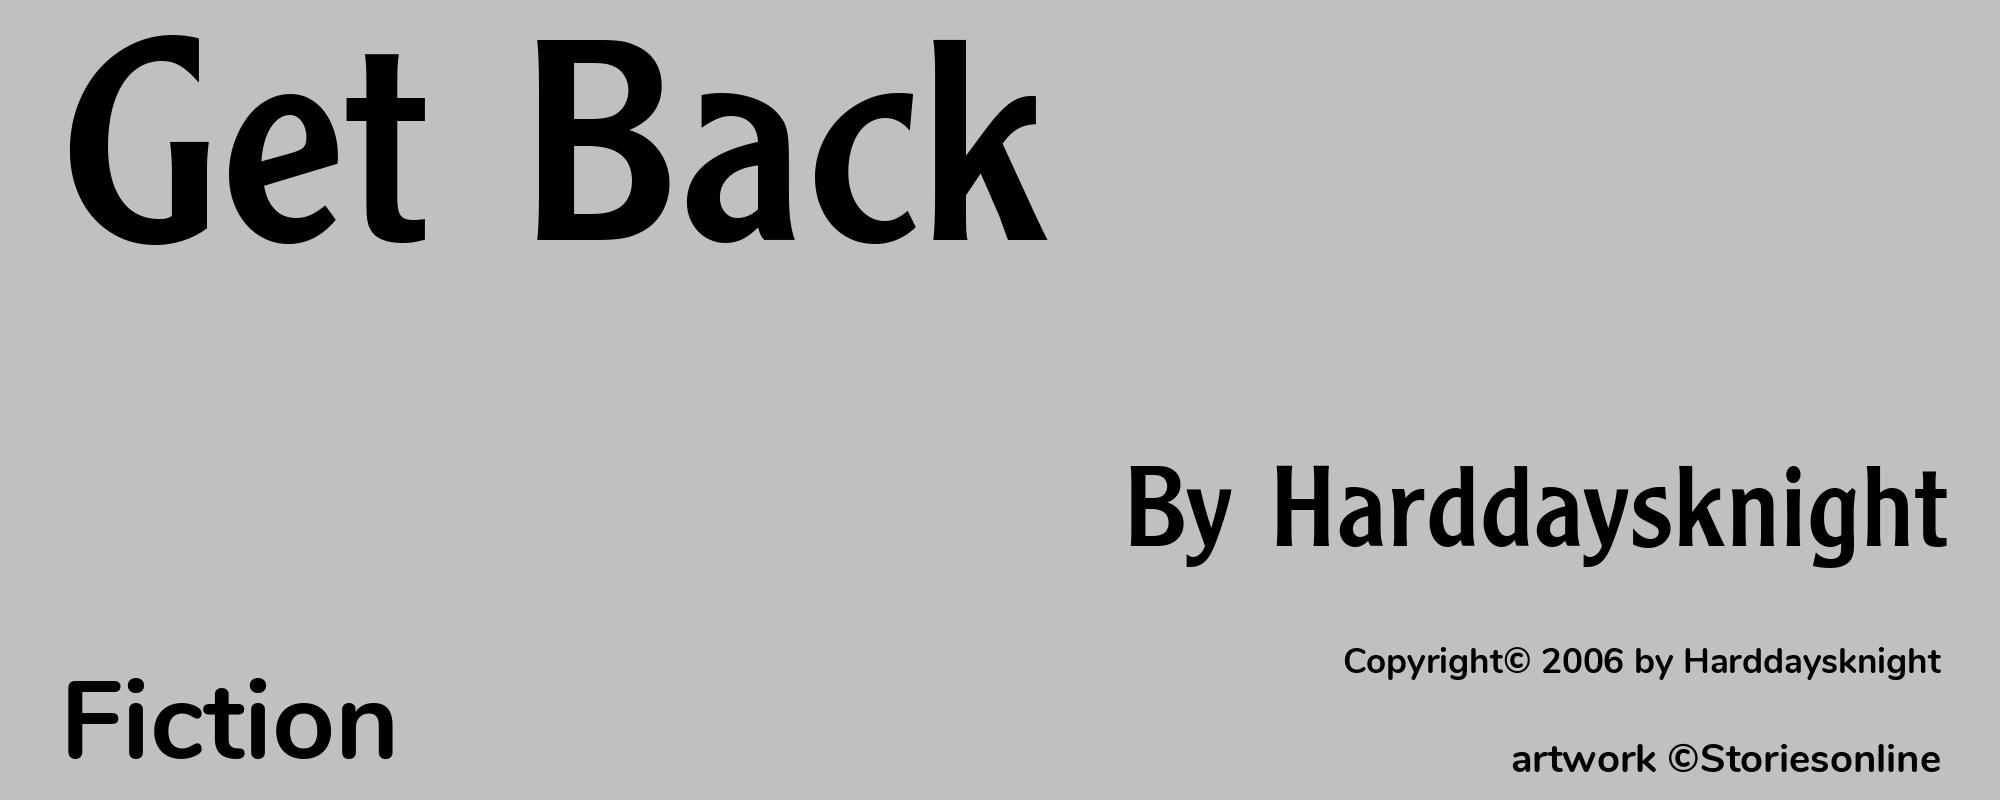 Get Back - Cover